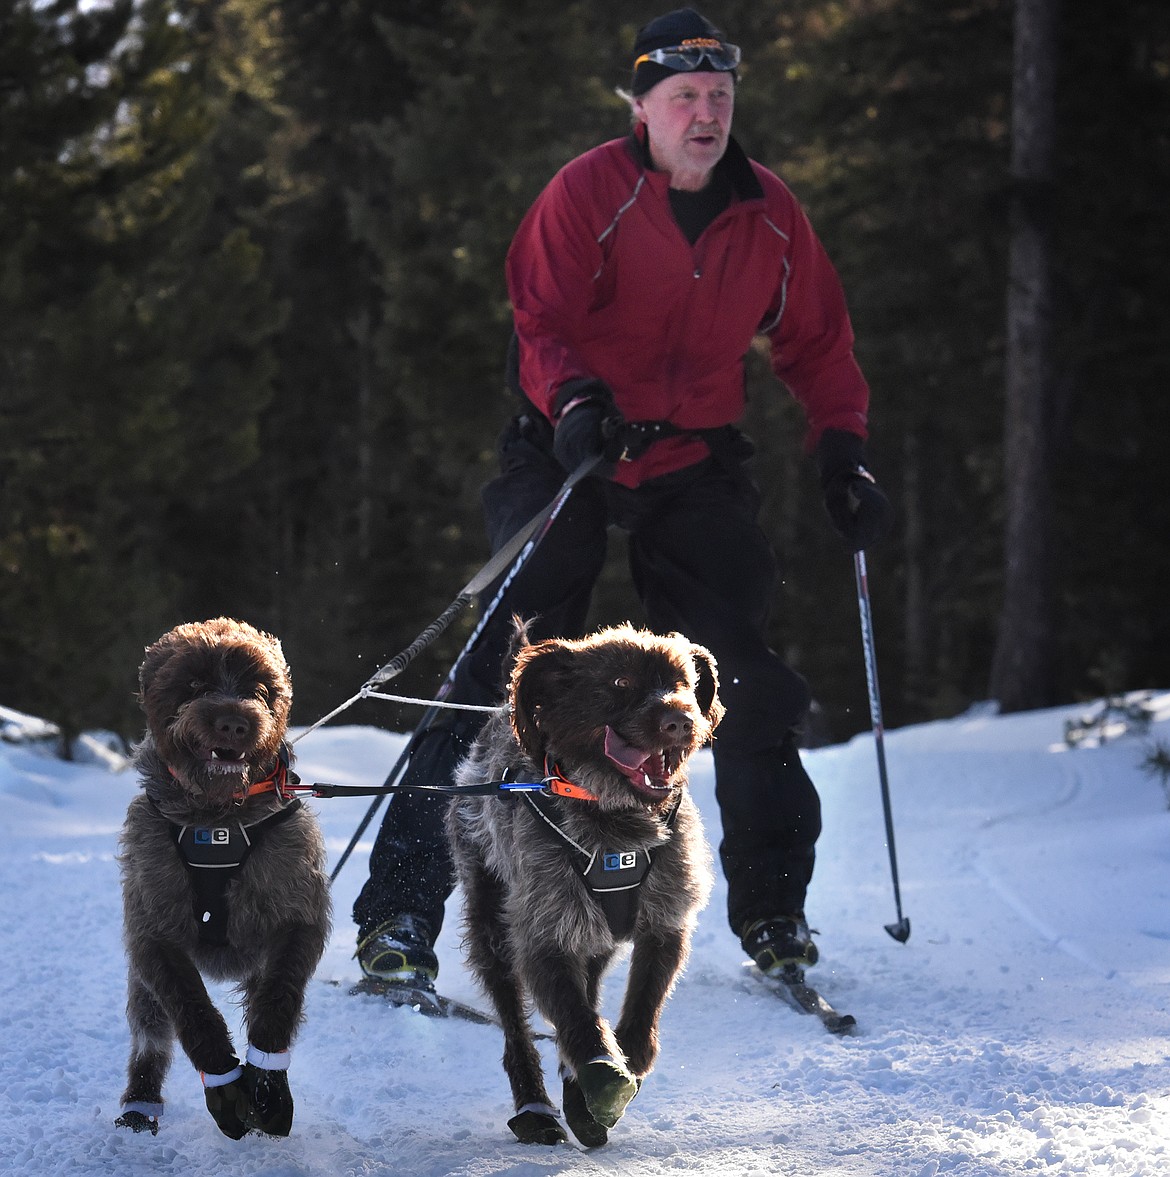 Jim Omdahl and his two-dog skijoring team near the halfway point of the Flathead Classic Saturday.
(Jeremy Weber/Daily Inter Lake)